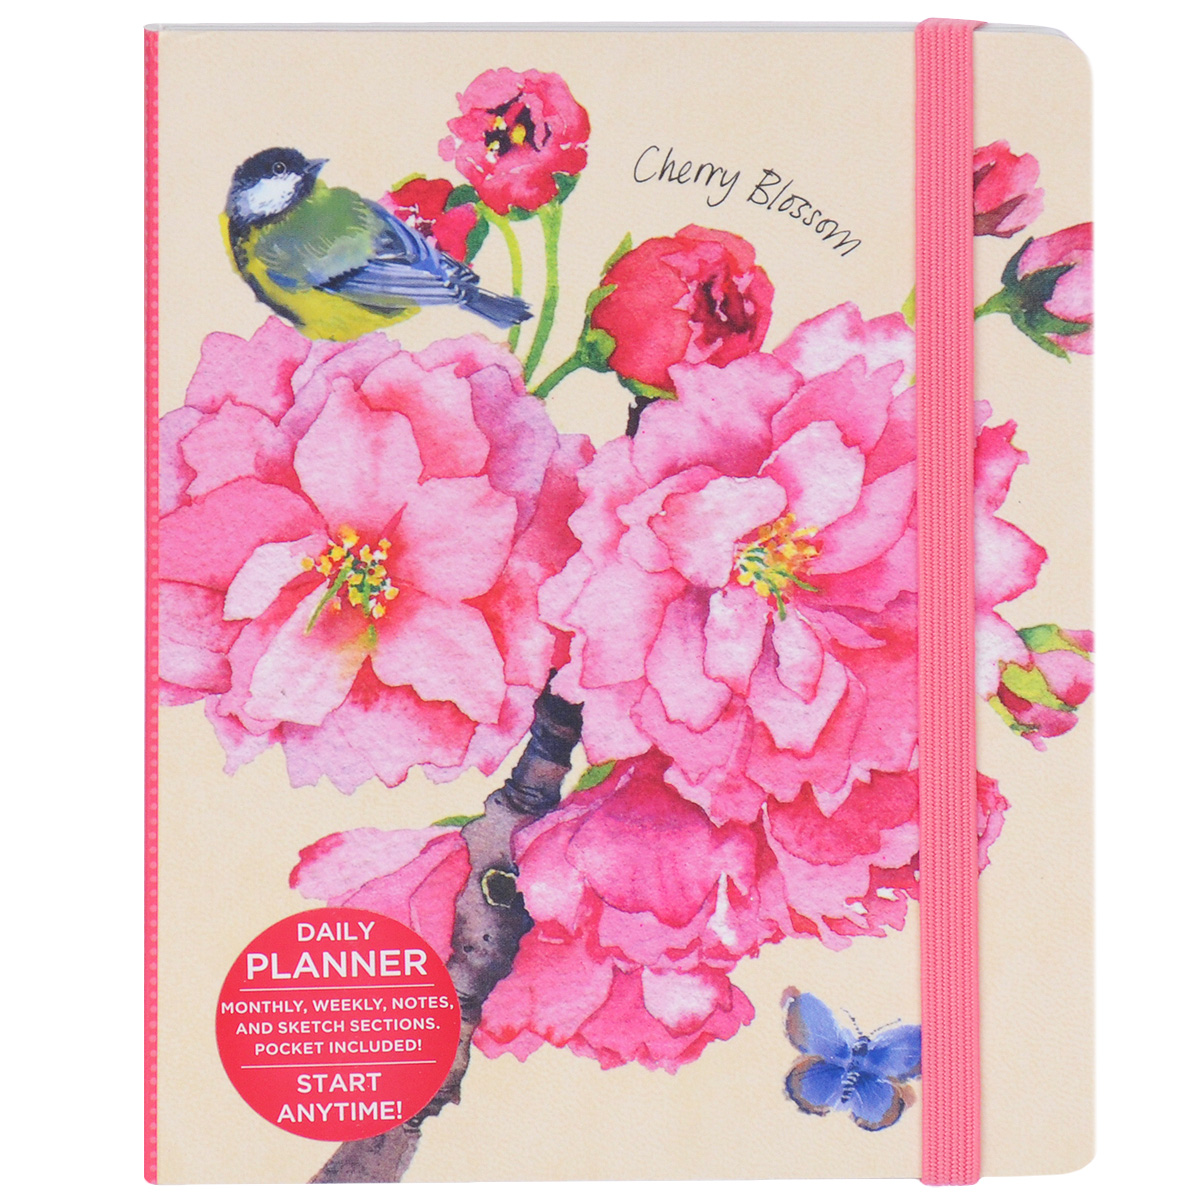 Daily Planner: Cherry Blossom